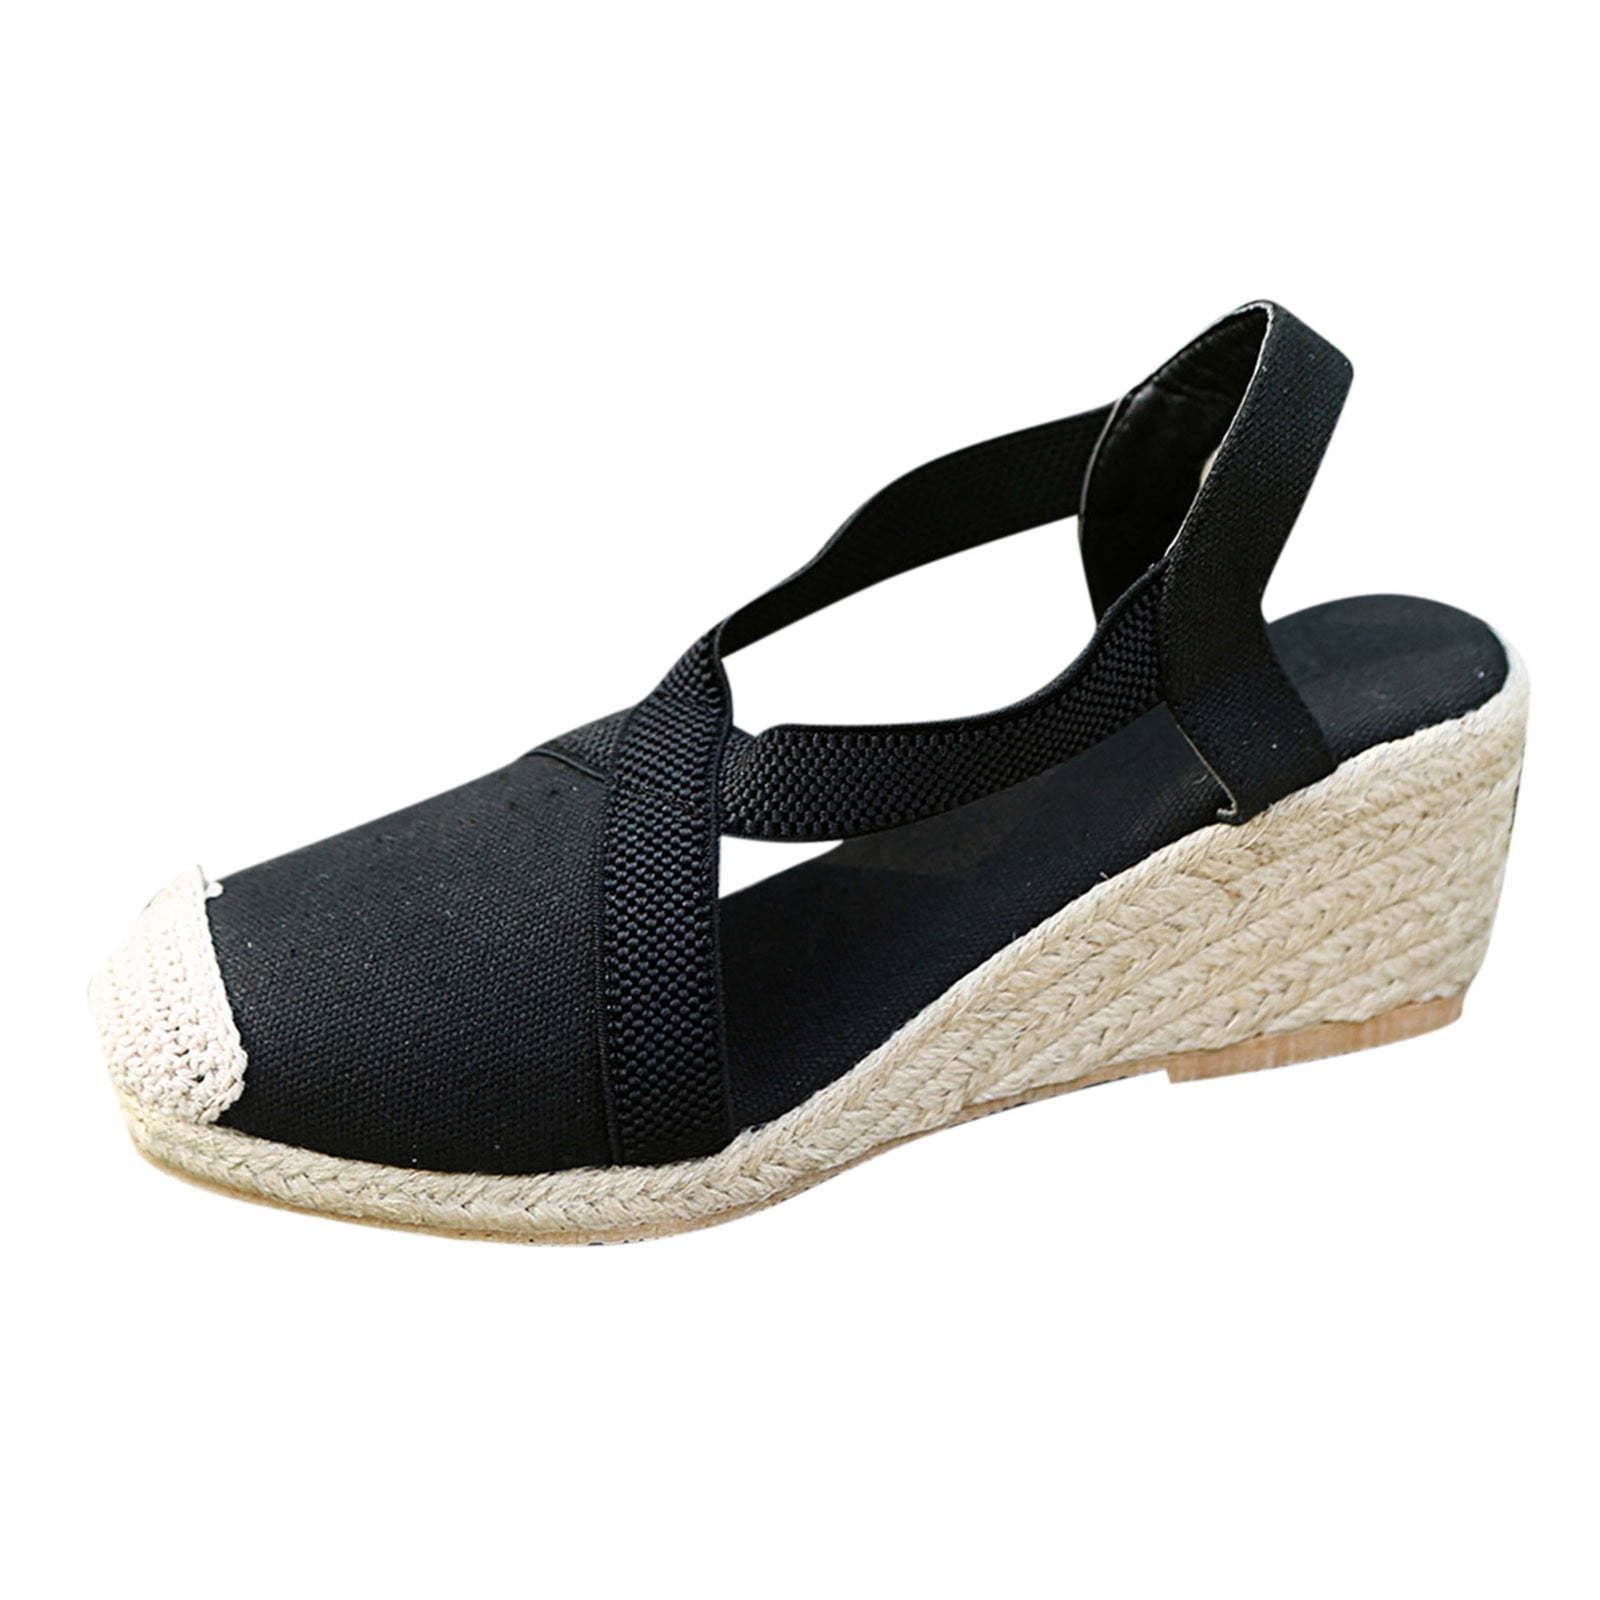 V by Very Extra Wide Fit Wedge Sandal - Black | very.co.uk